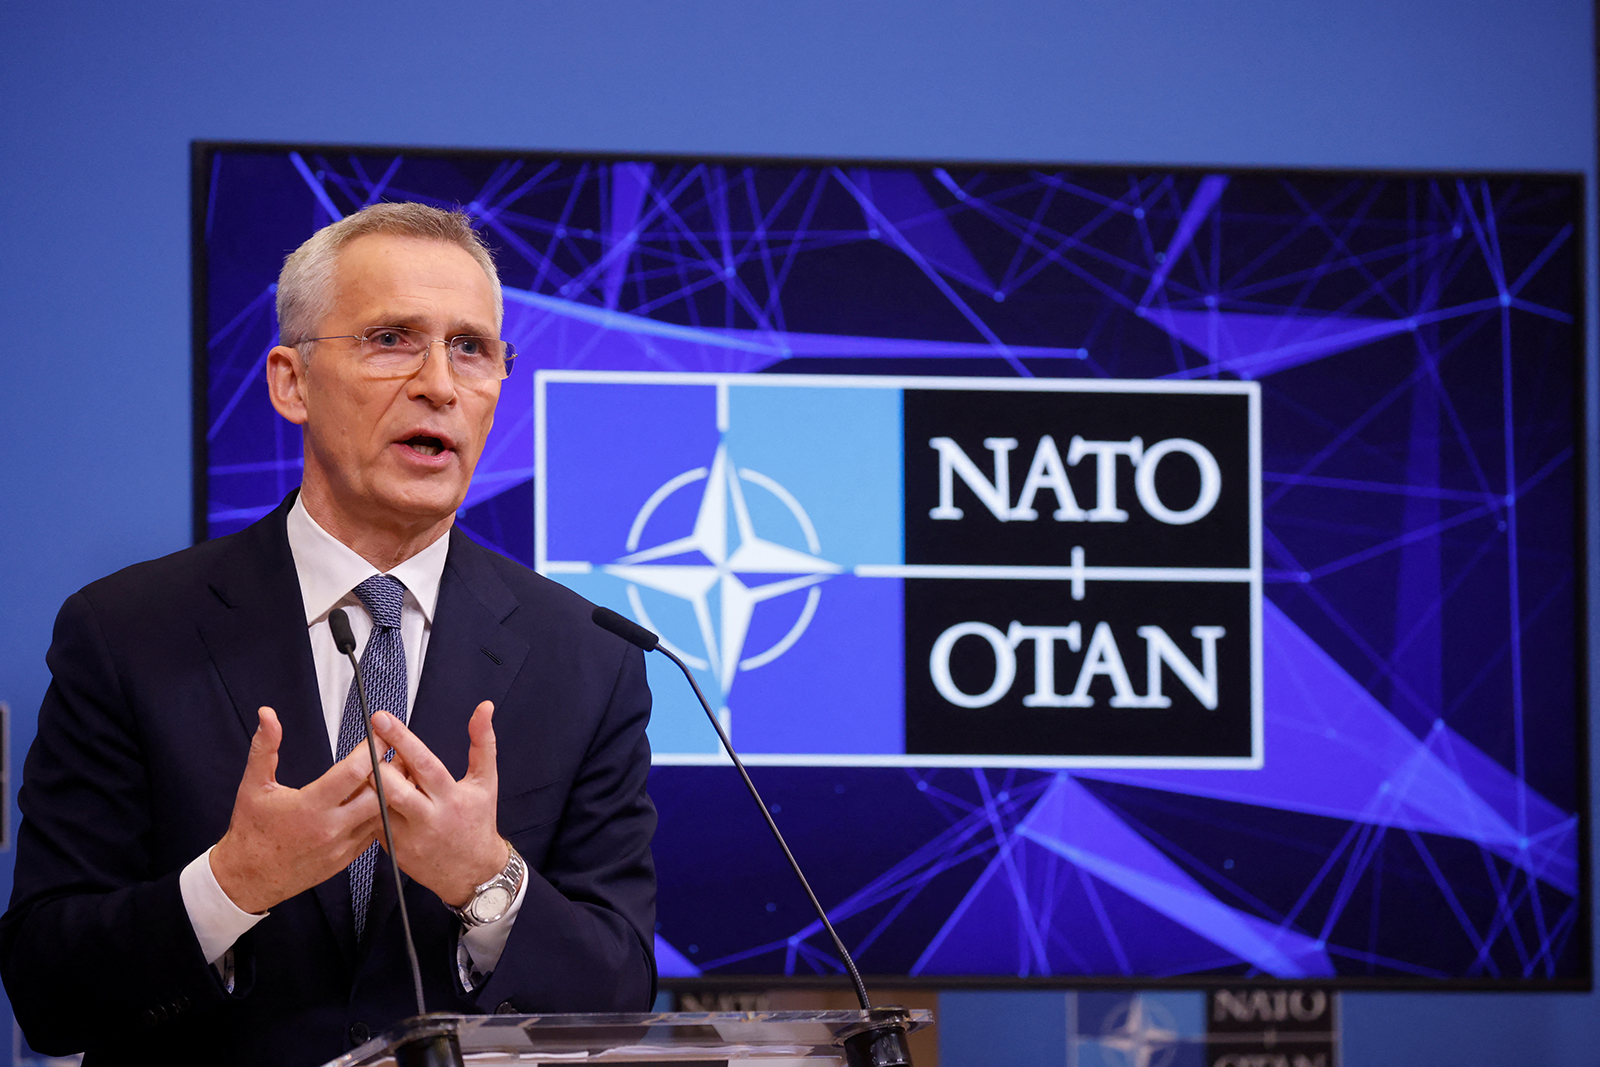 Finland's official accession to NATO is historic, alliance chief says